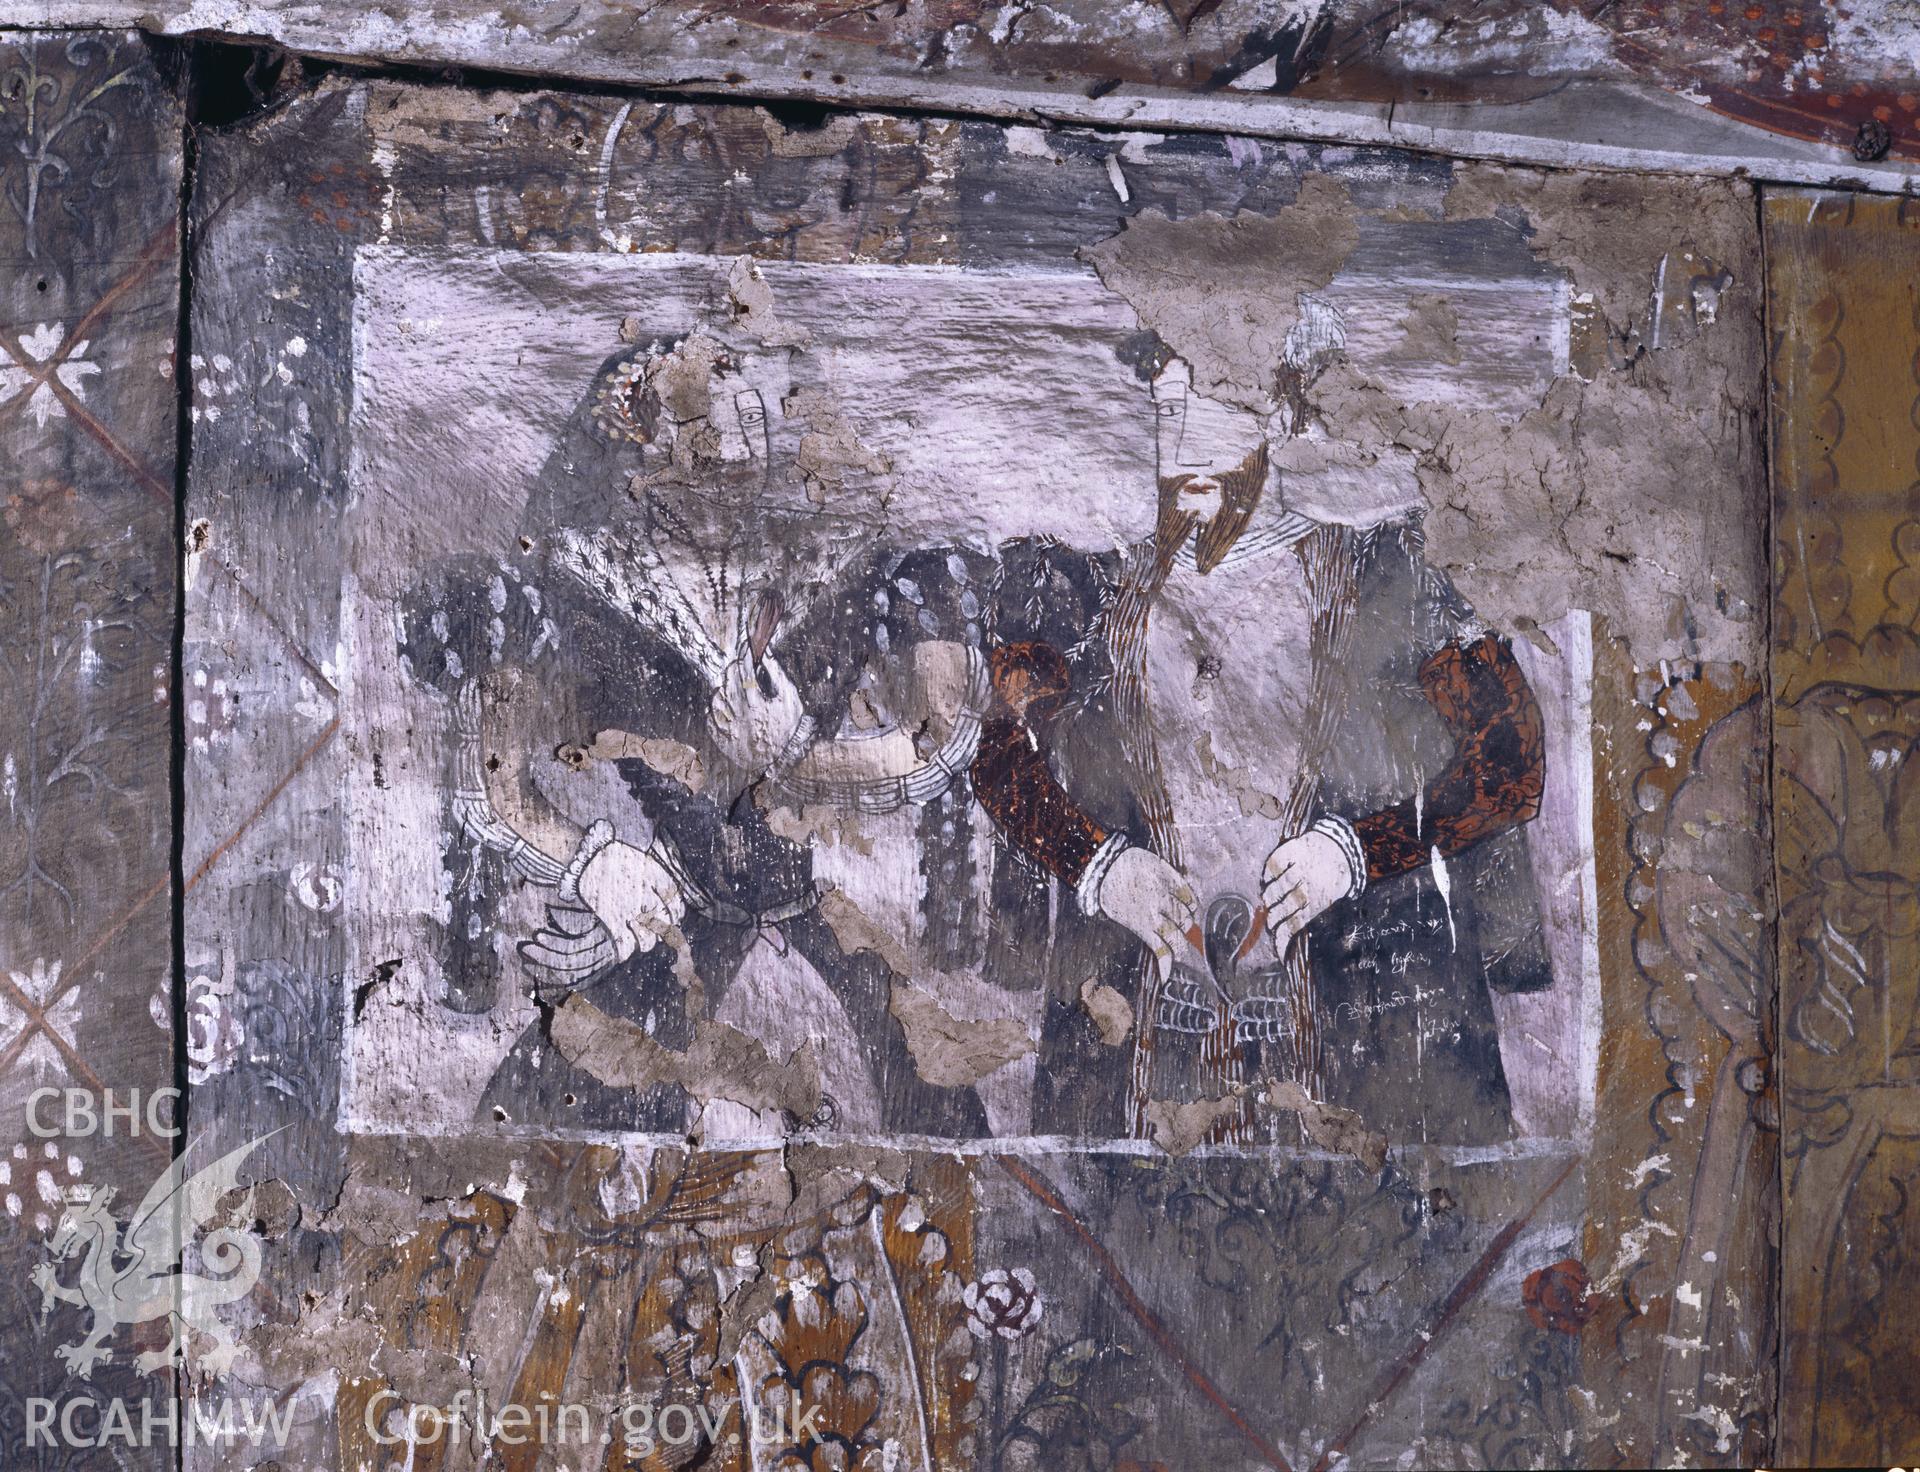 RCAHMW colour transparency showing wallpainting at Althrey Hall, taken by Iain Wright, 2003